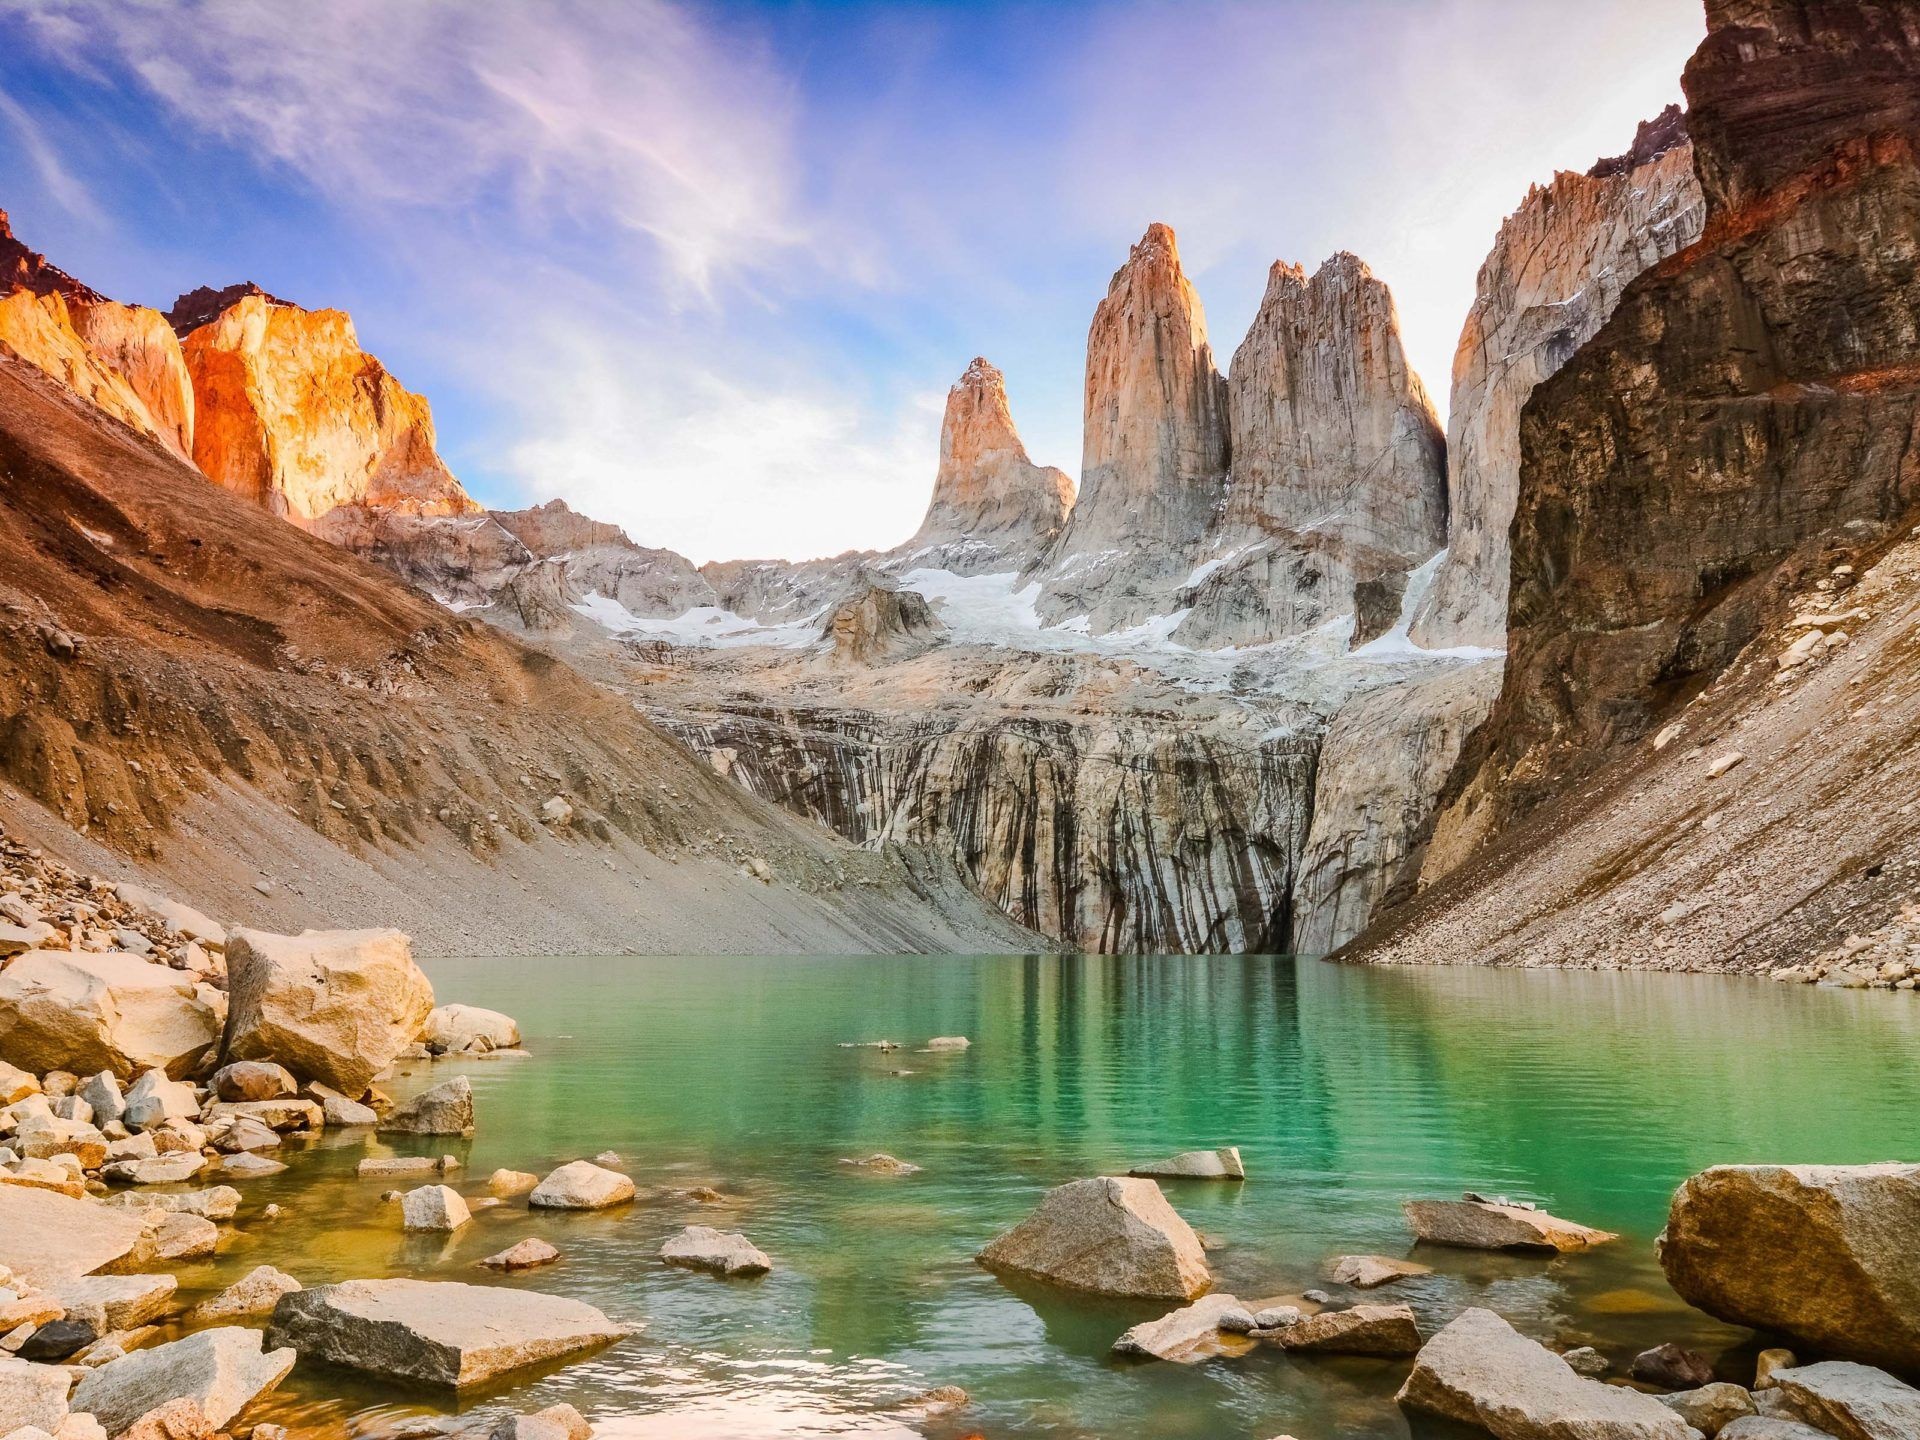 Chile: Torres del Paine National Park, Southern Patagonia. 1920x1440 HD Wallpaper.